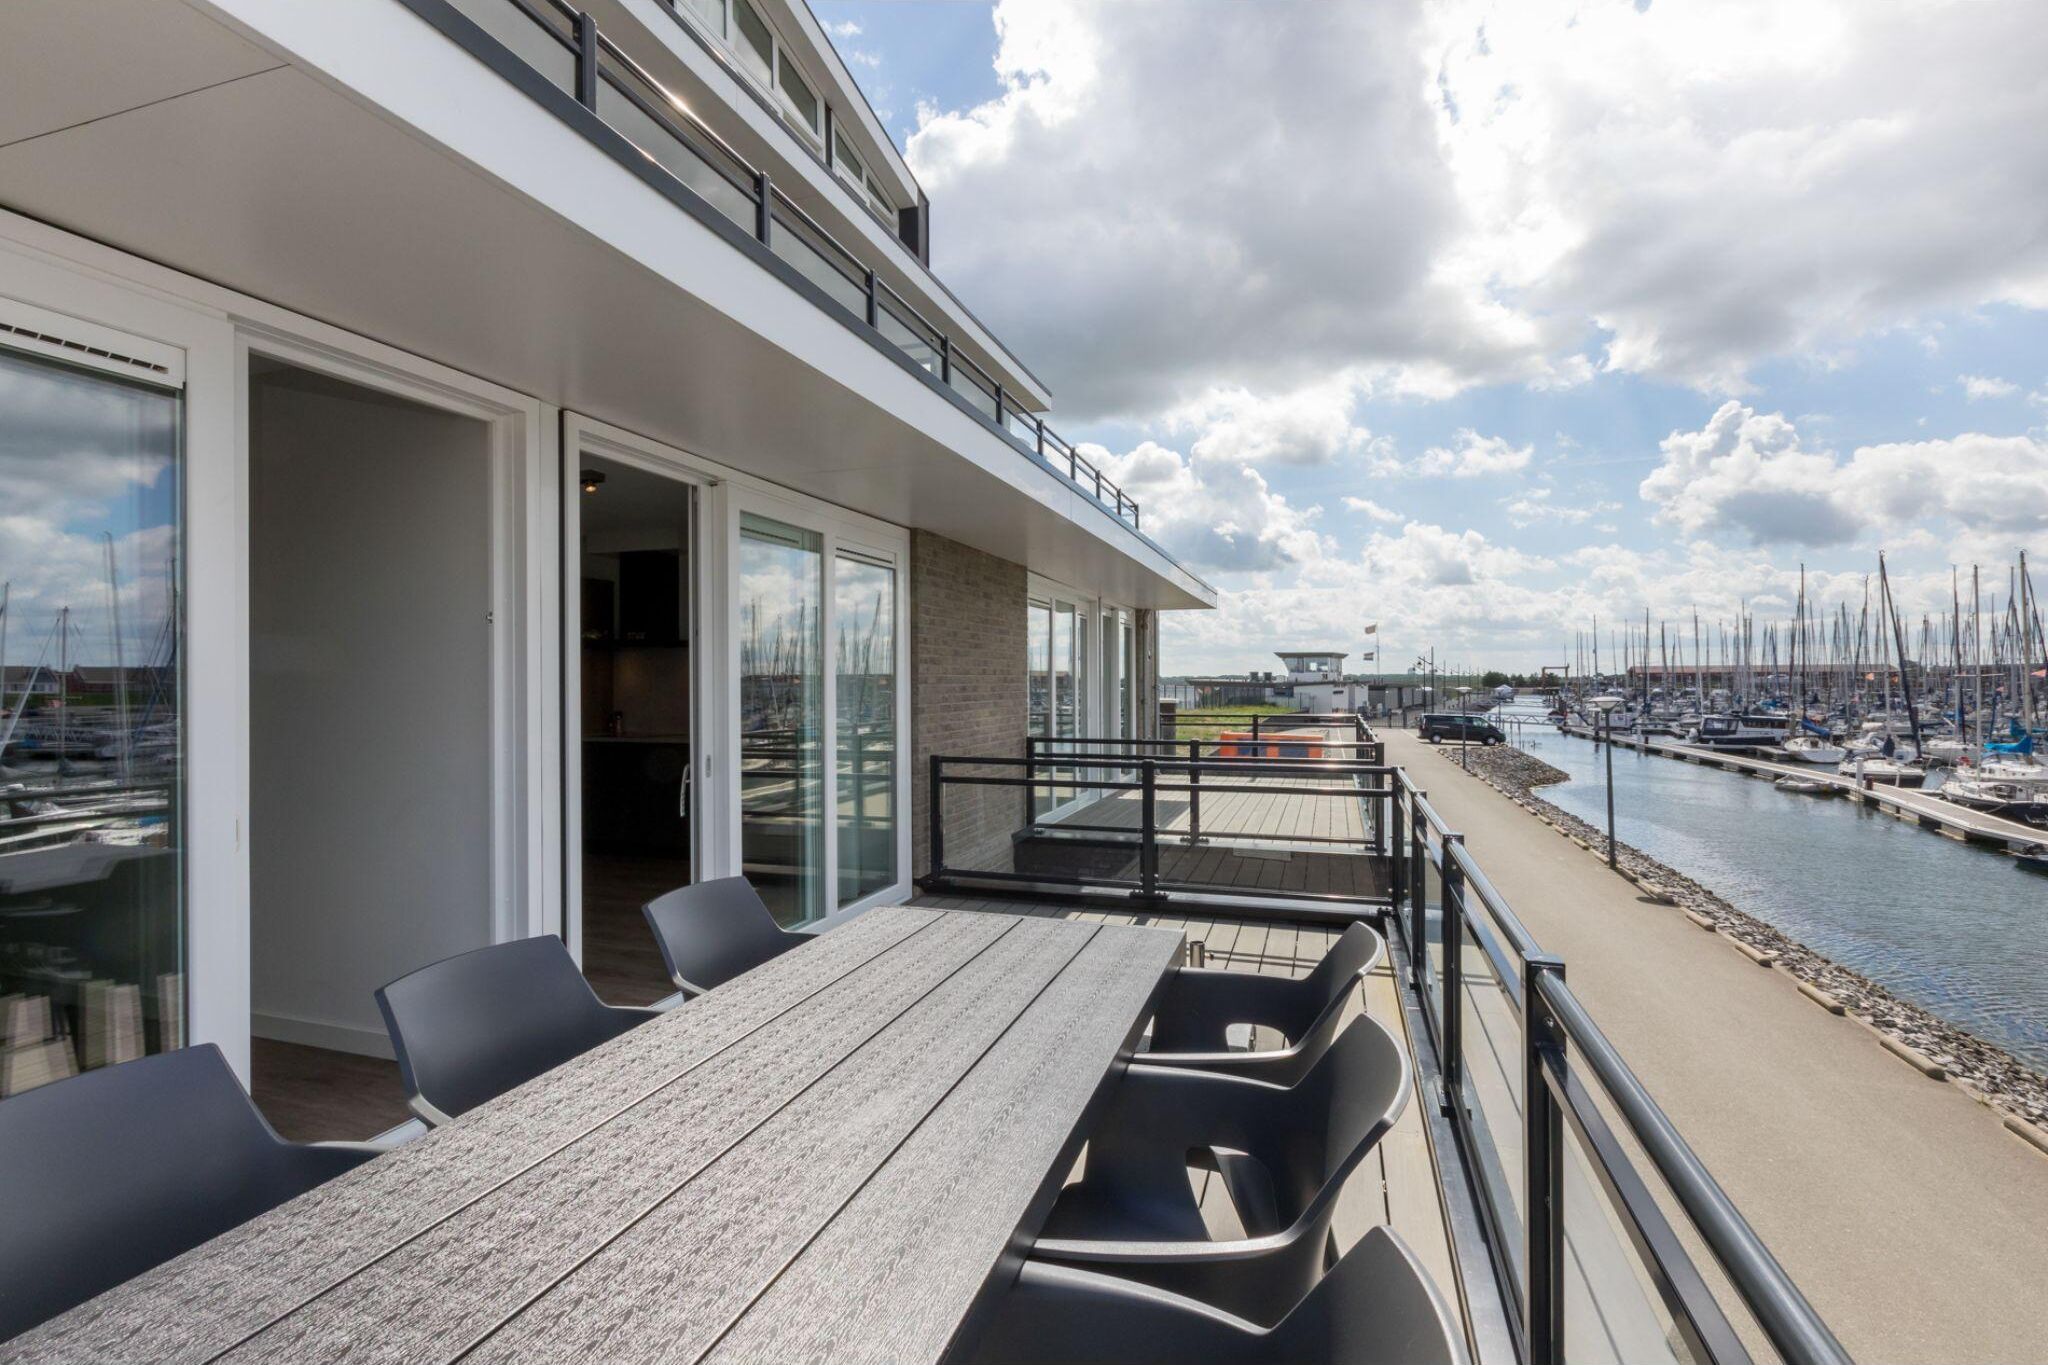 Unique apartment, located on the Oosterschelde